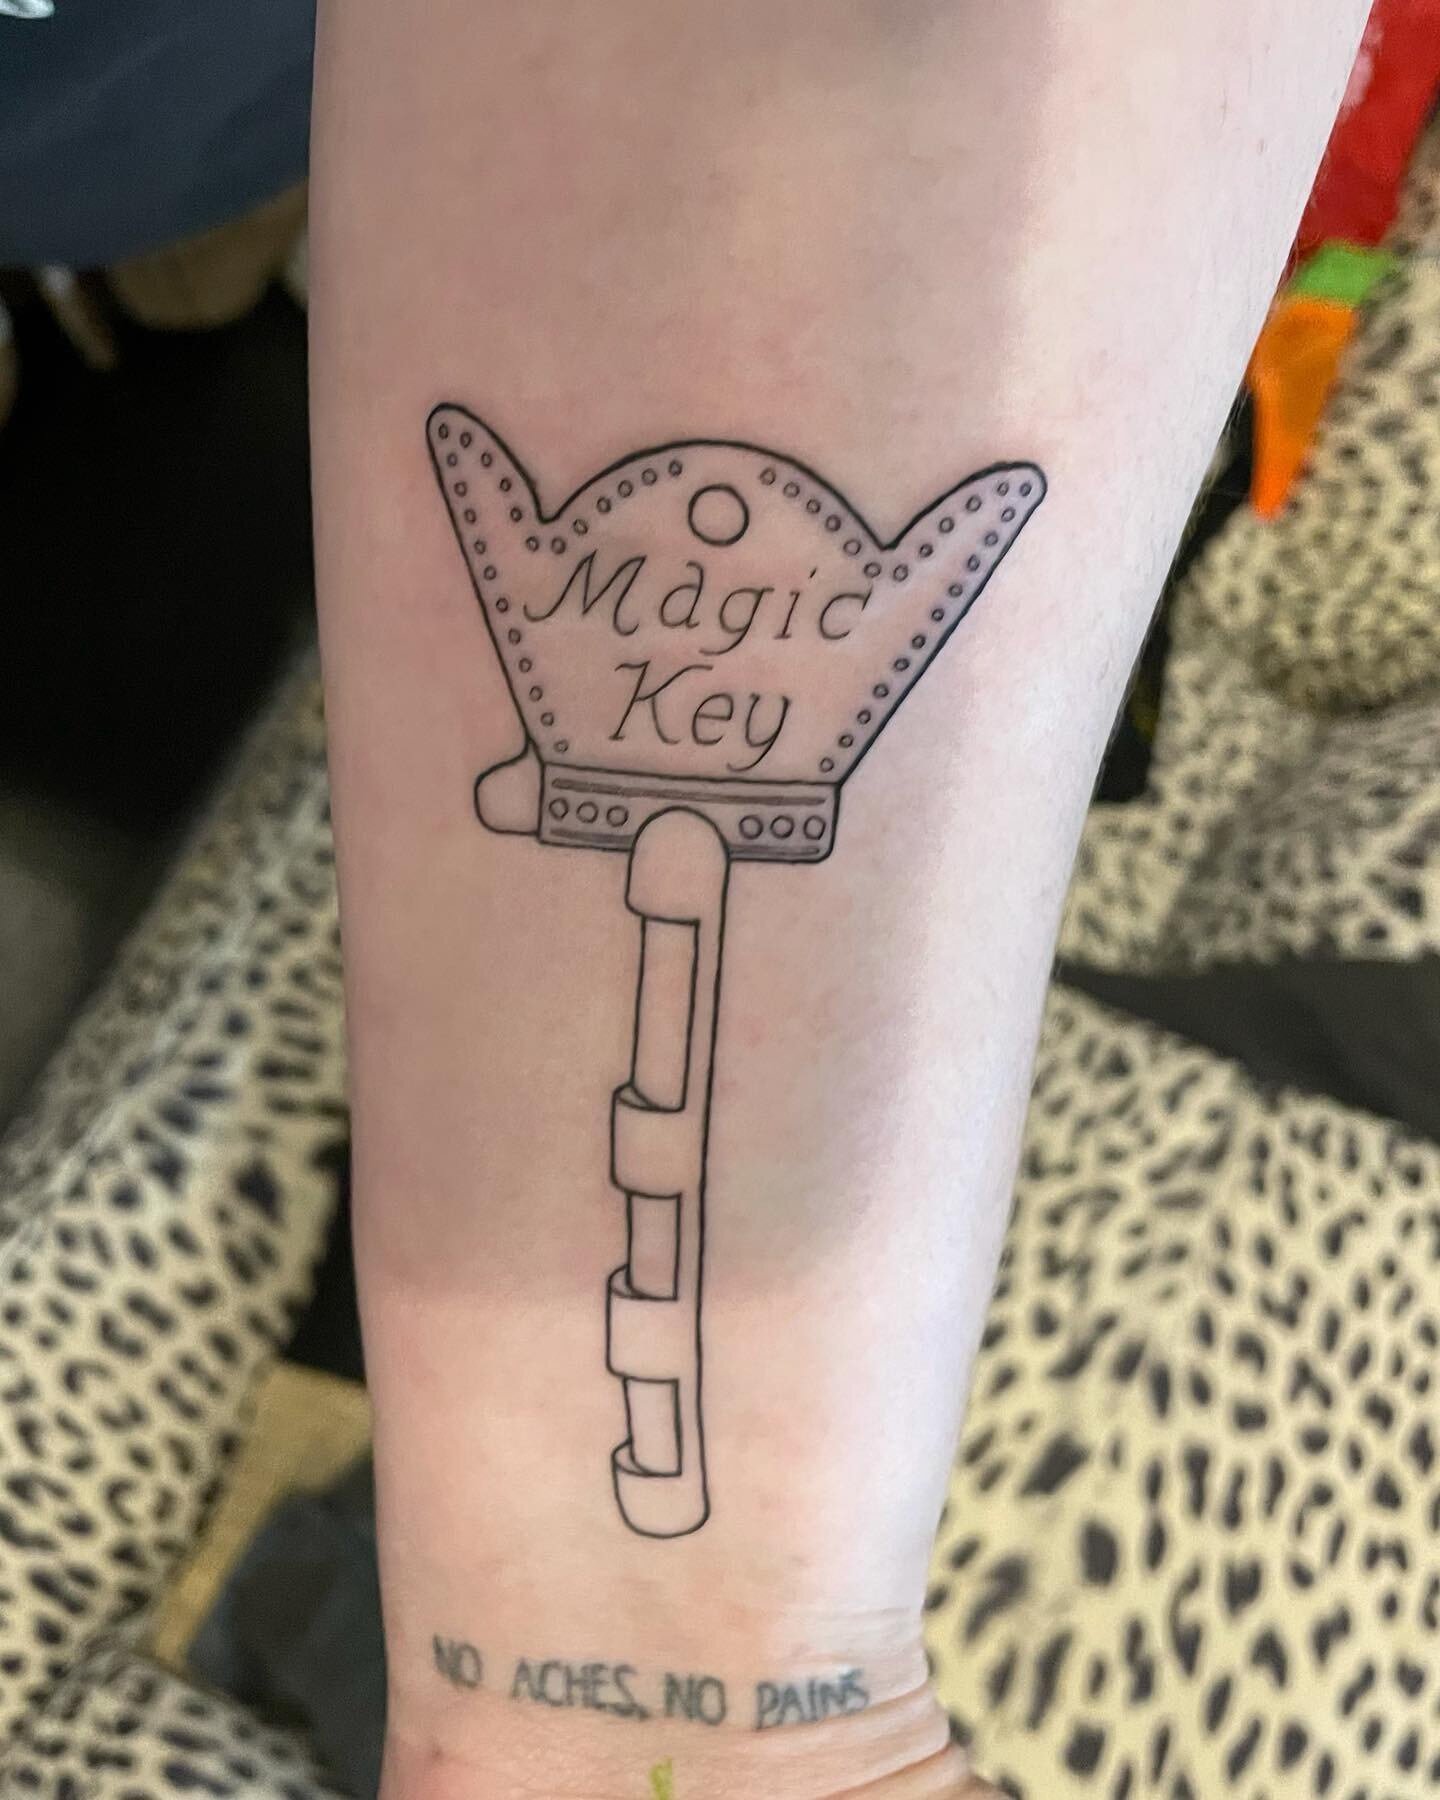 Got me a lil&rsquo; freshie tattooie from the epically talented @luke.alive.arts. I&rsquo;ve been waiting for months till we didn&rsquo;t have swim classes with the babies and finally got my chance. This key is a reminder of one of my favorite places